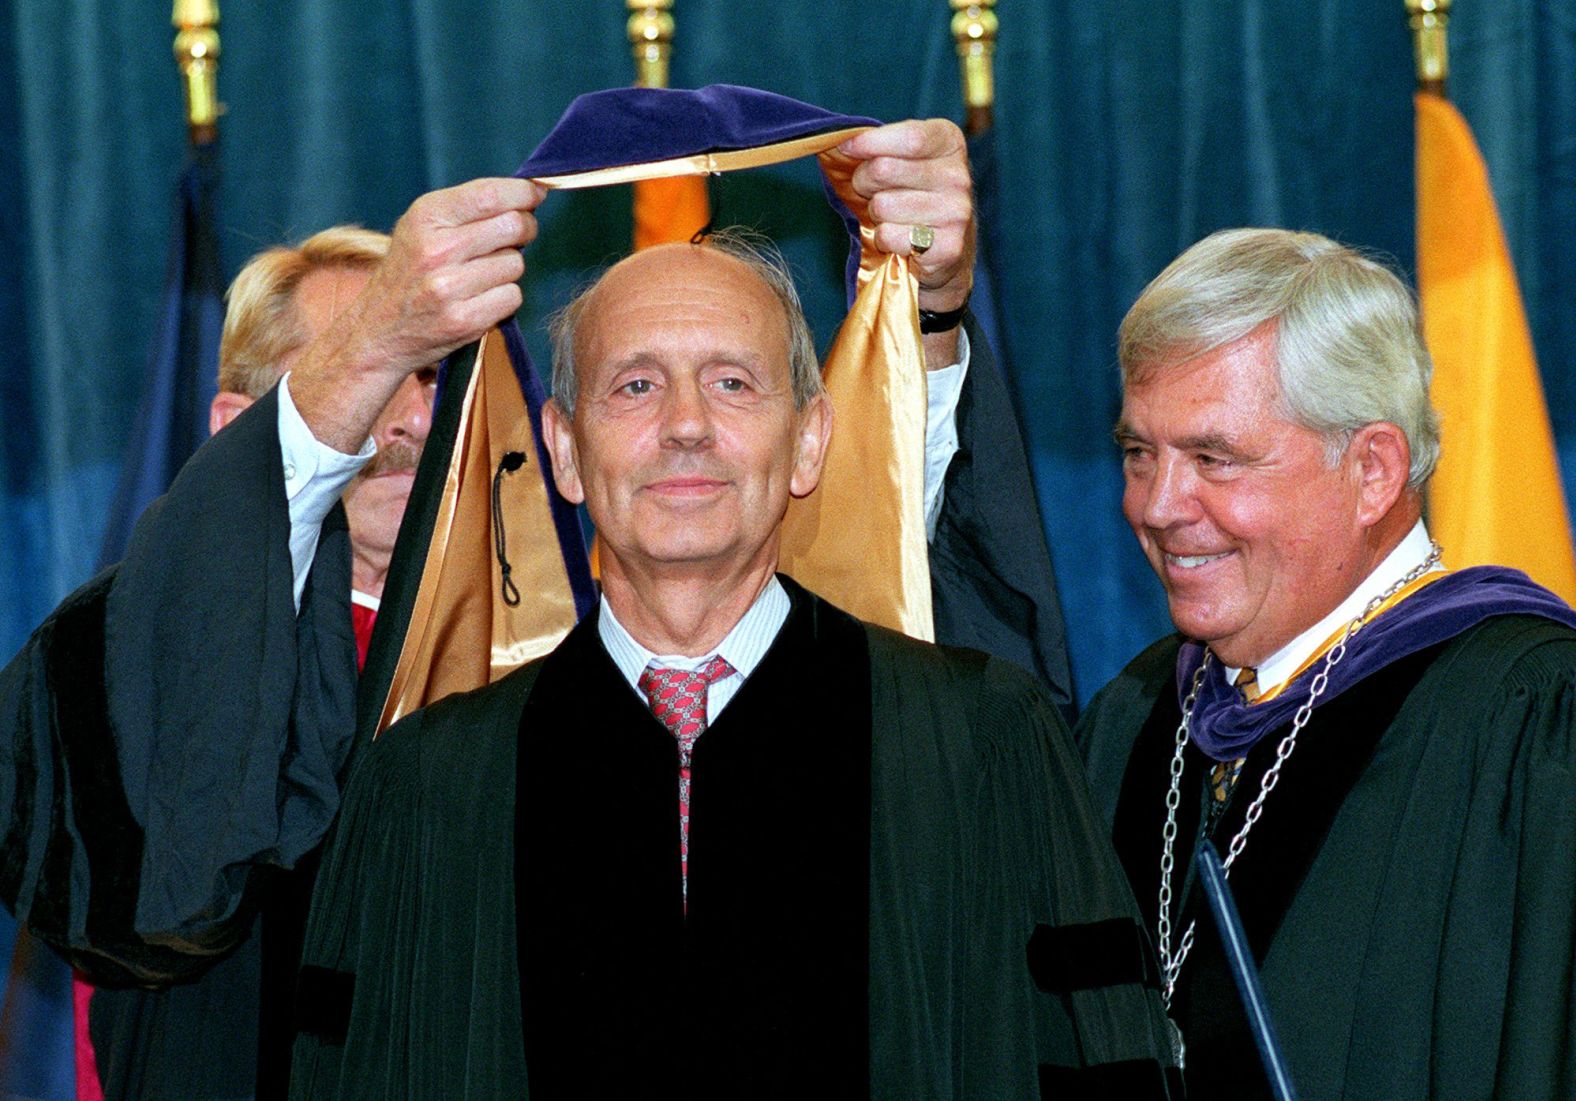 Breyer receives an honorary degree at the Suffolk University Law School in September 1999.